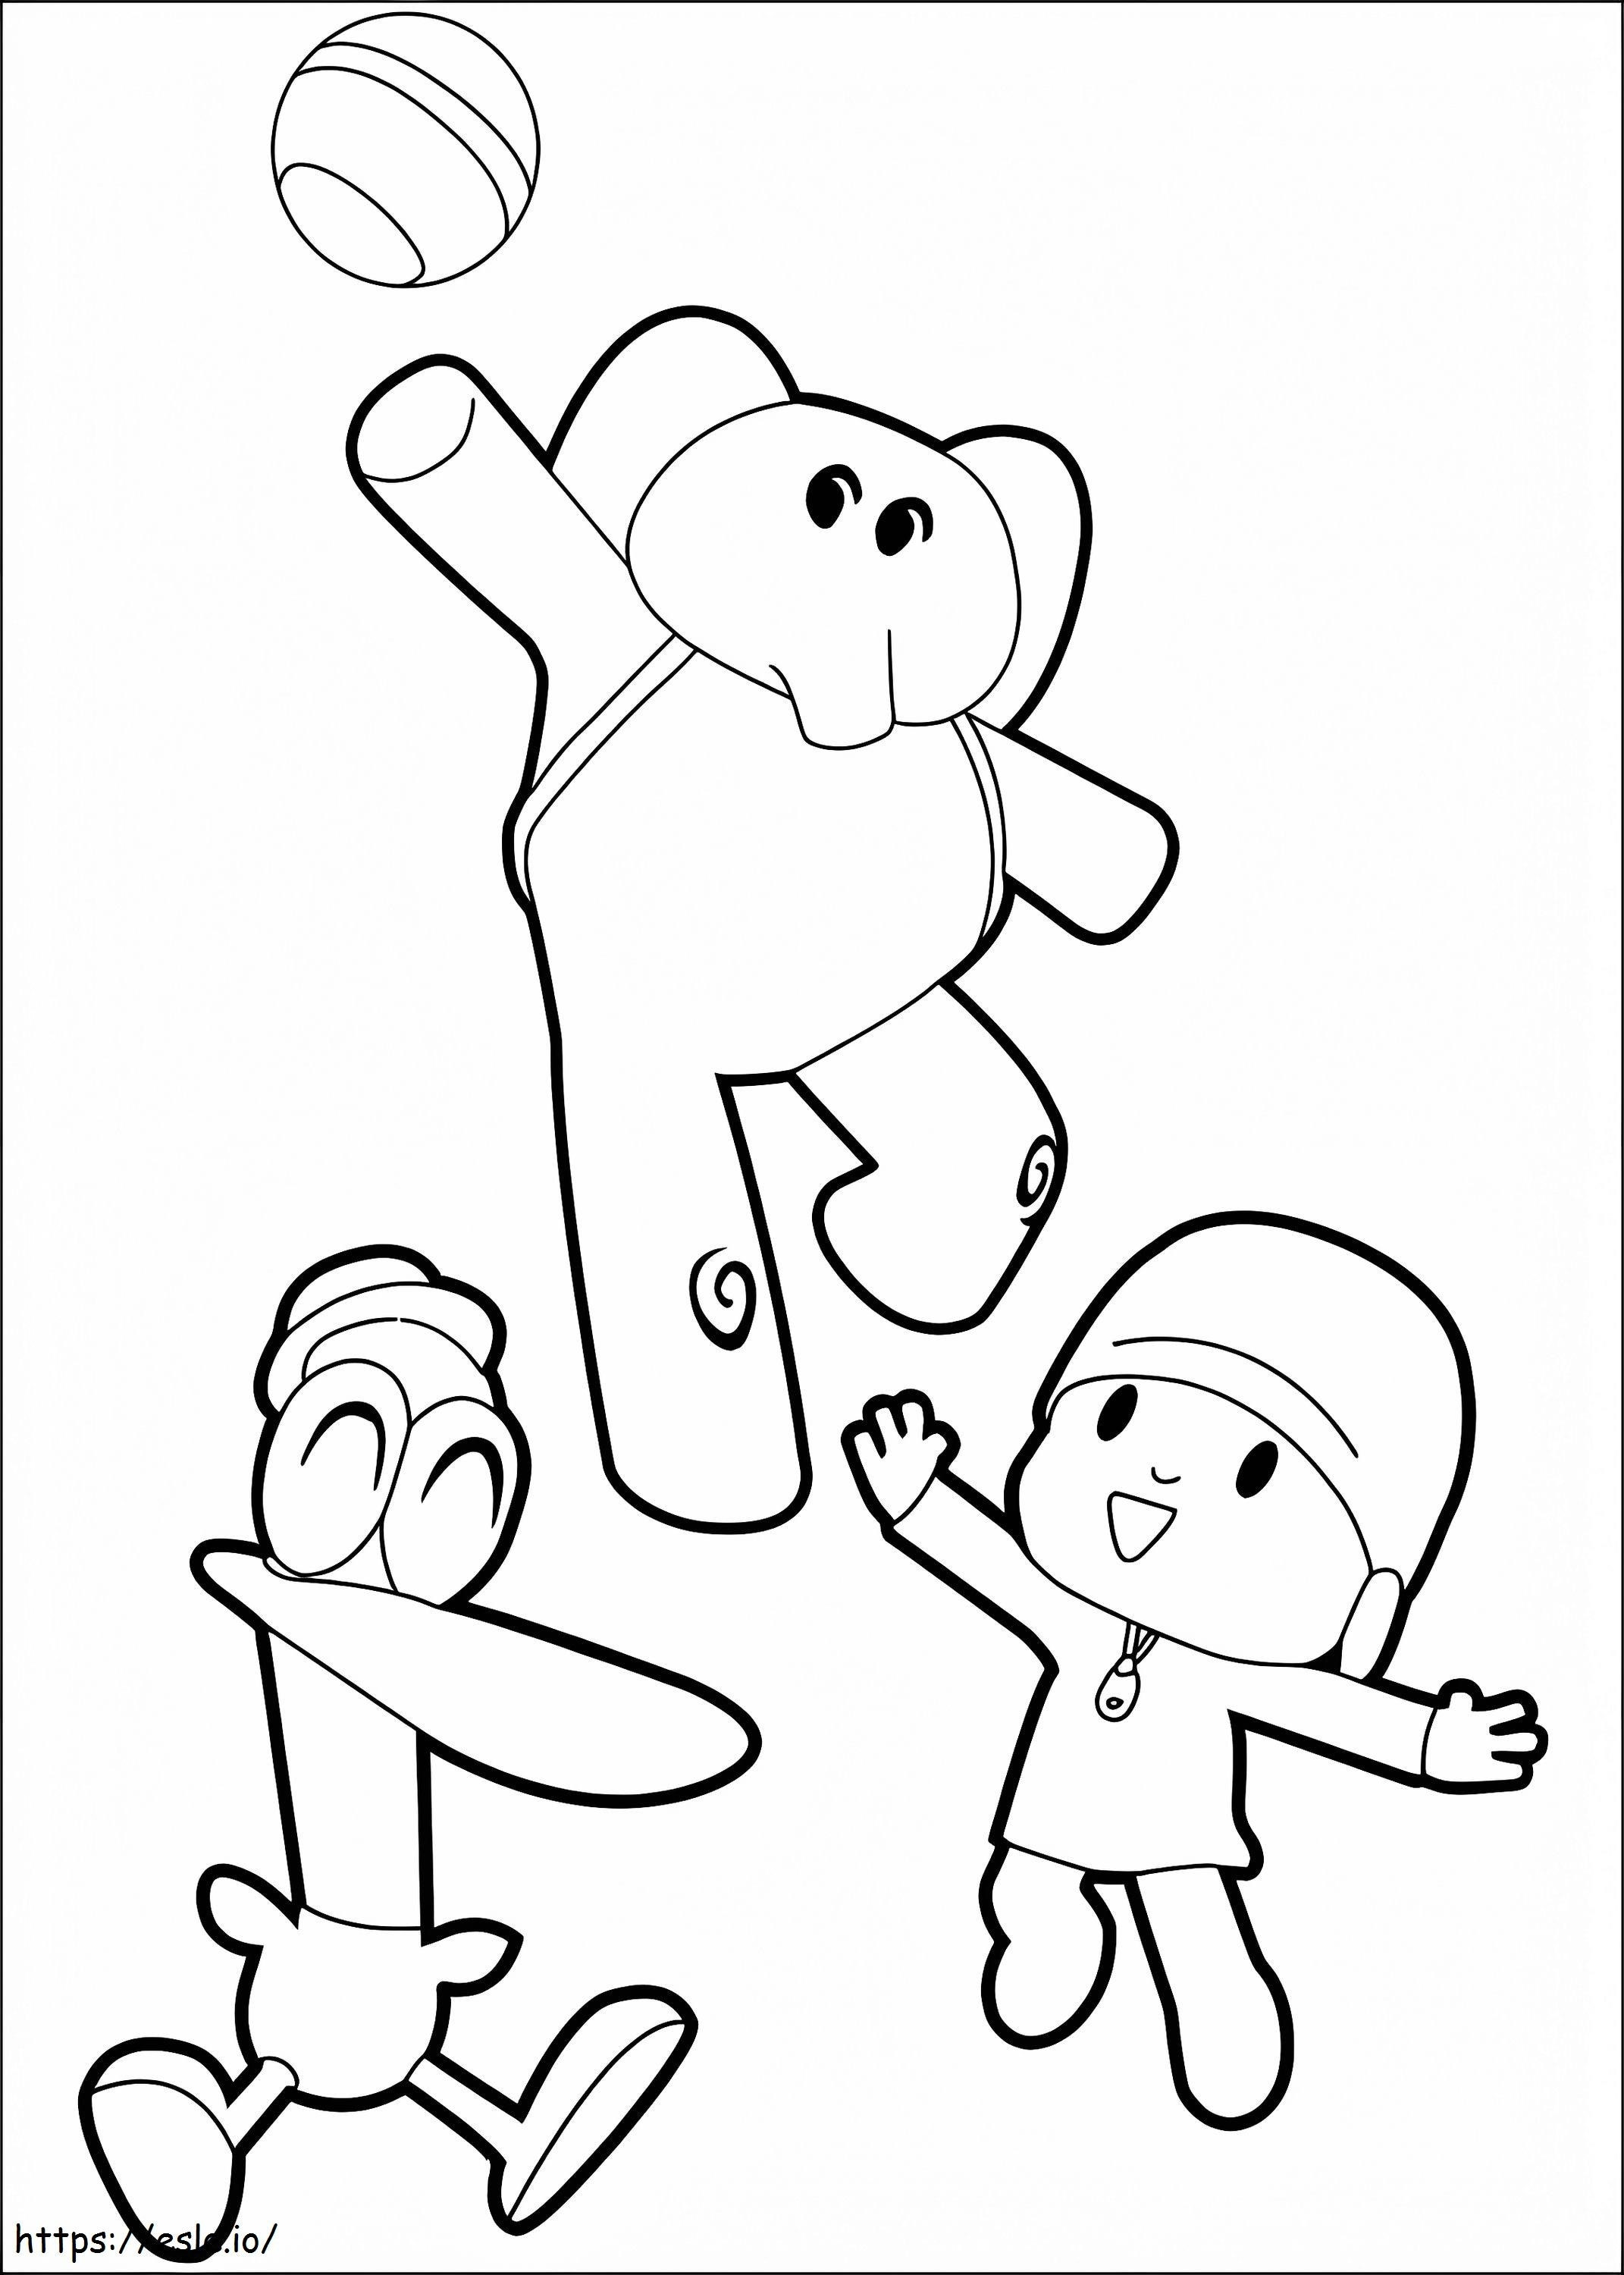 Pocoyo And Friends coloring page